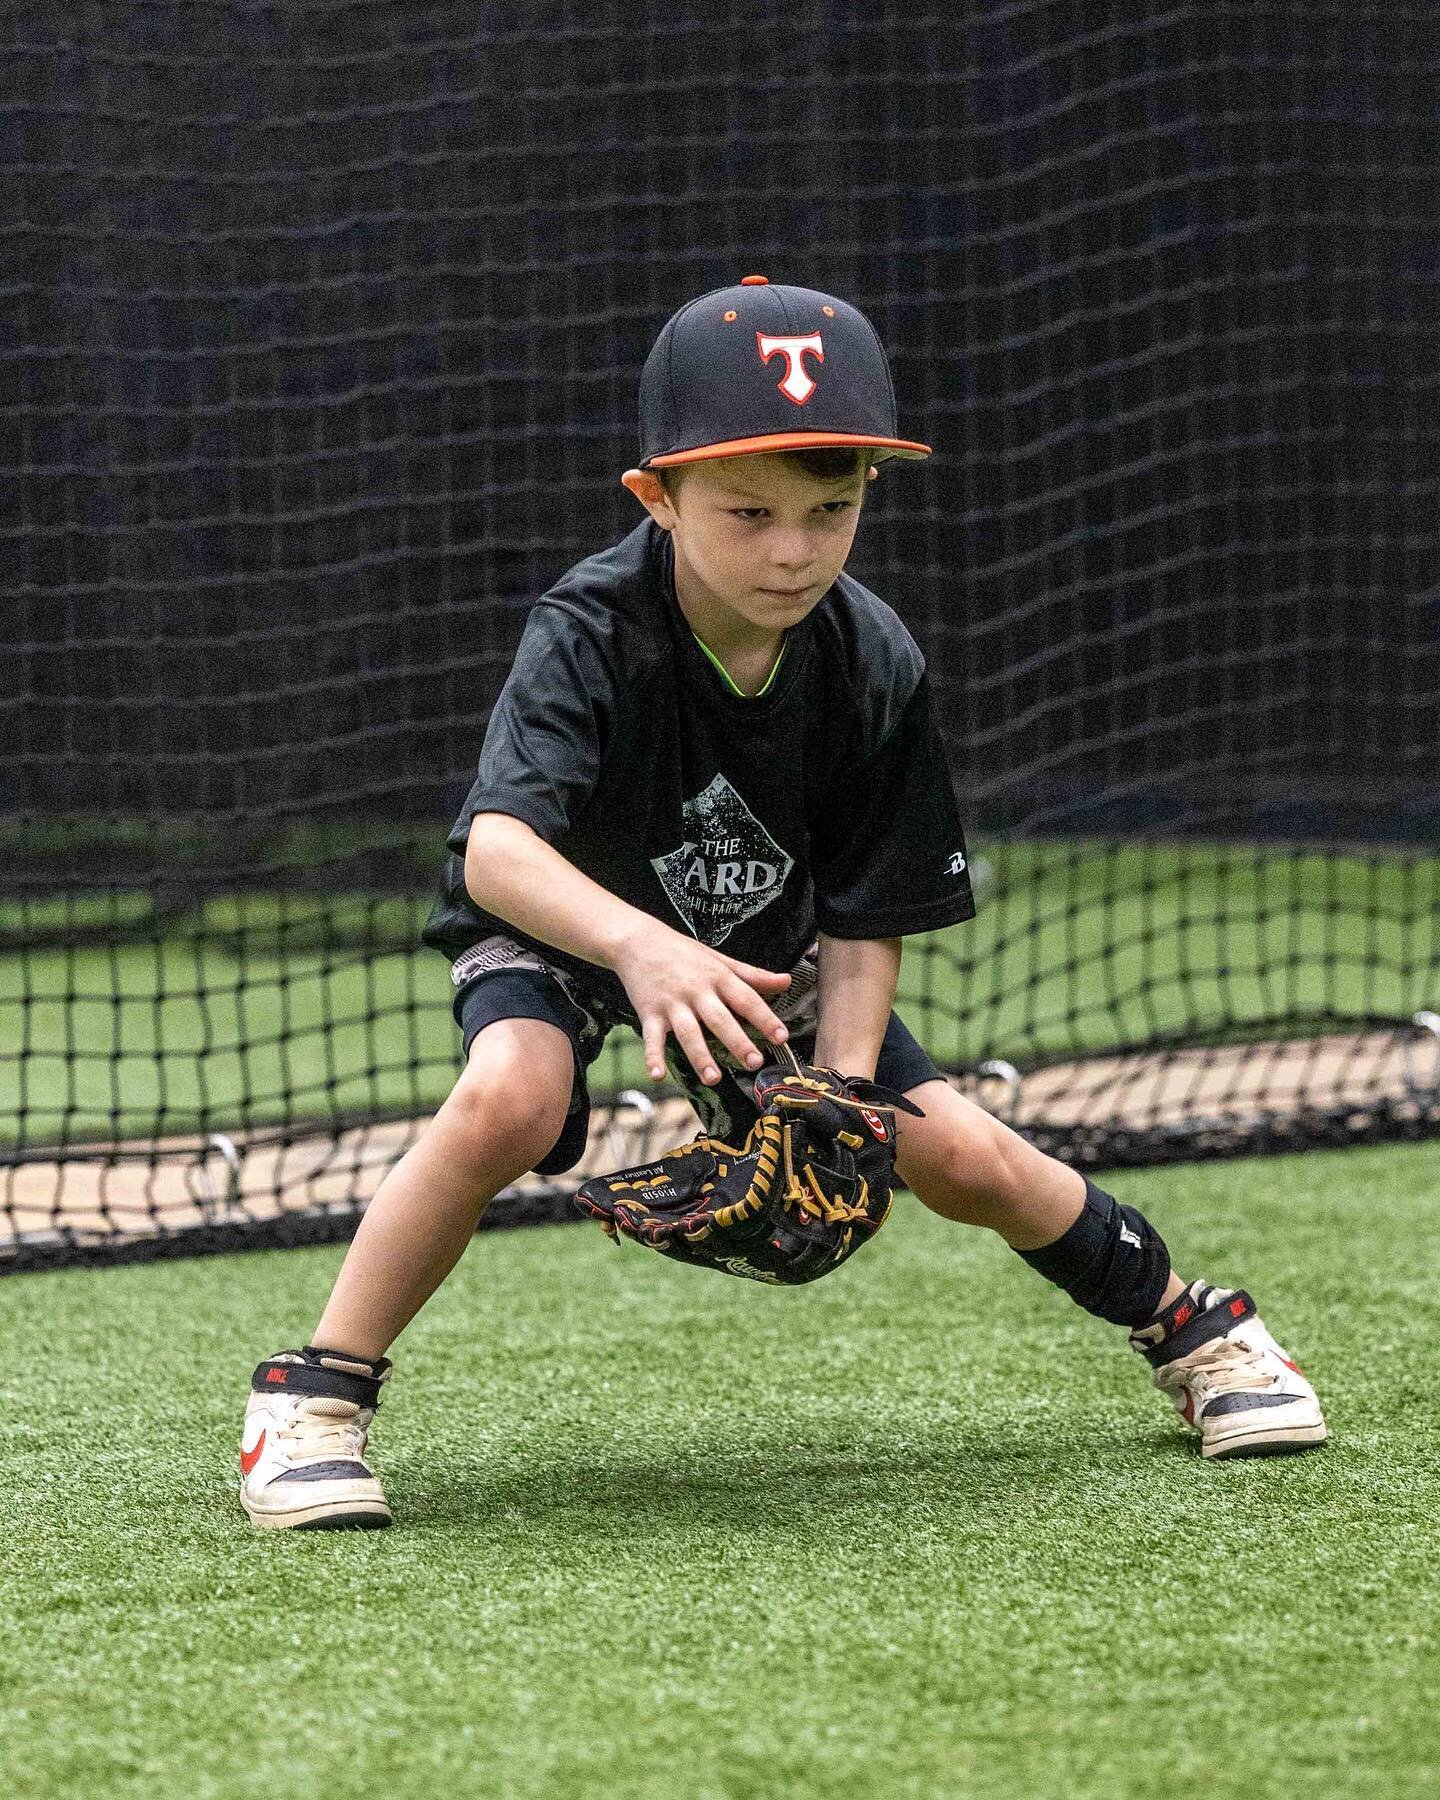 🚨Don&rsquo;t forget to MAKE IT HAPPEN with us at SATURDAYS AT THE YARD! 

Speed &amp; Agility Training (Led by Tucker Maxwell) 
&bull; Ages 11-14
&bull; 9:00am-10:00am 
&bull; $25 | Register in The Yard @ Wire Park App 

Softball Pitching Fundamenta